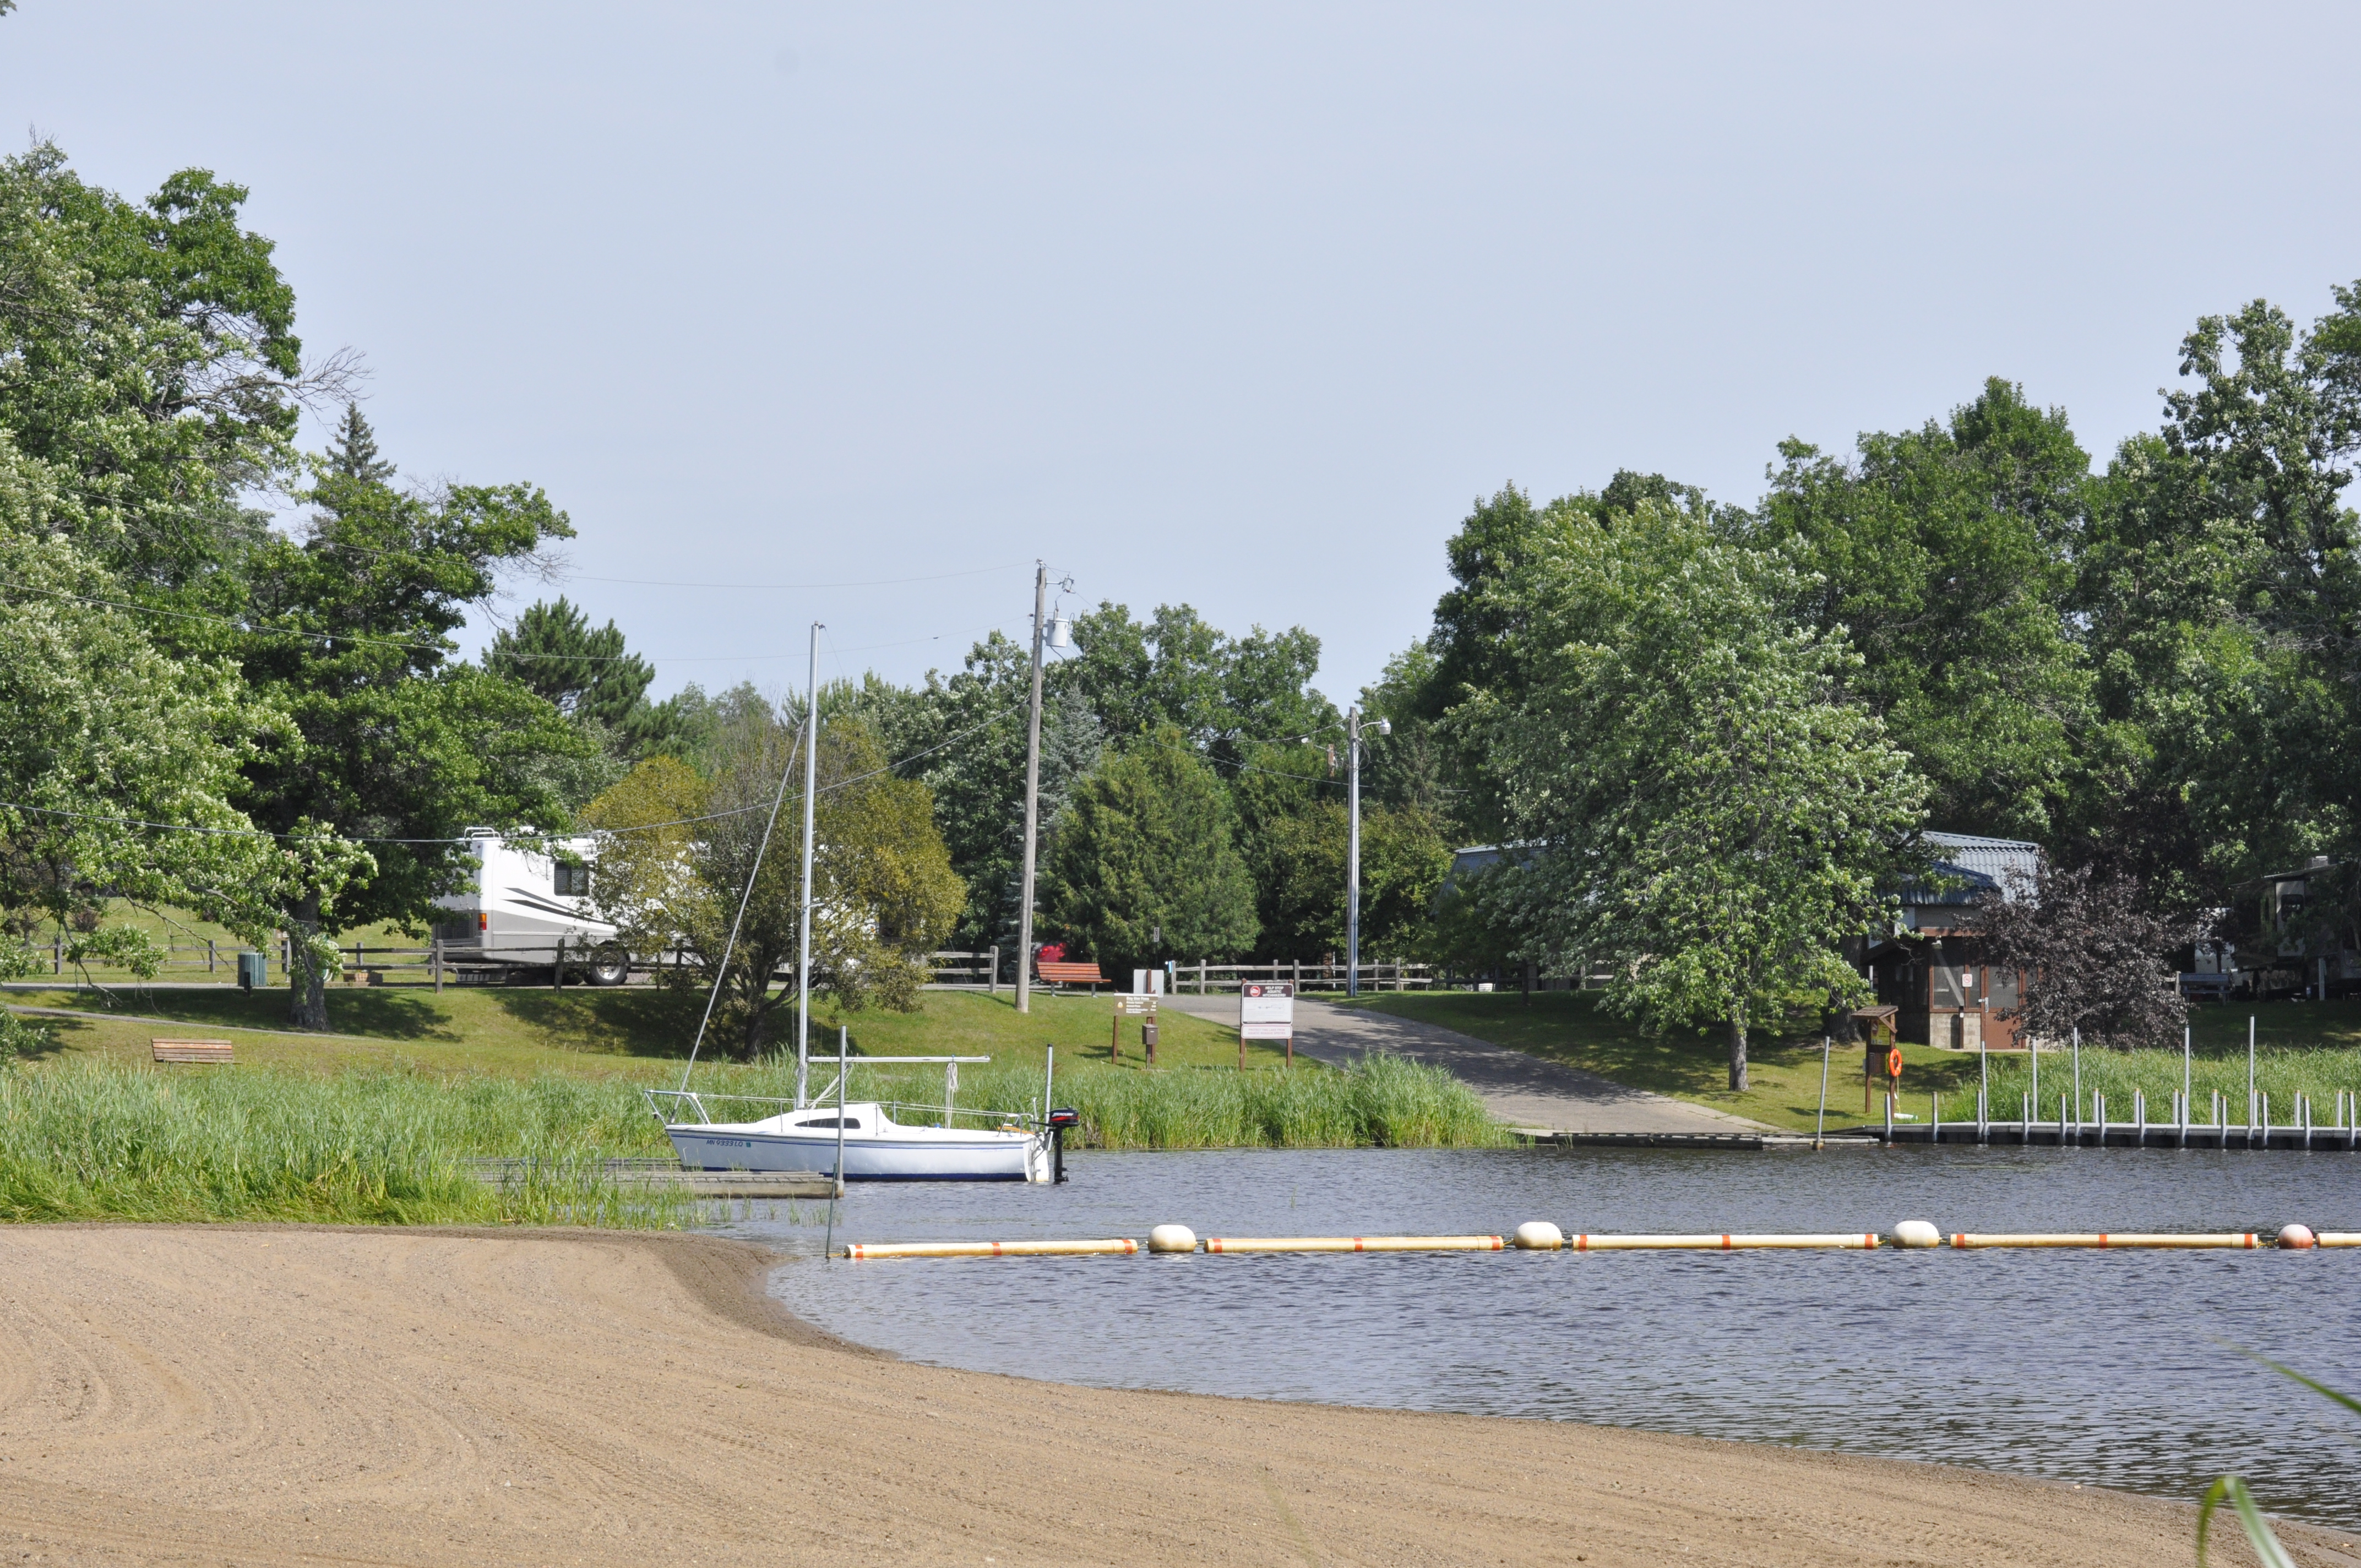 A boat ramp on a lake and a sandy beach